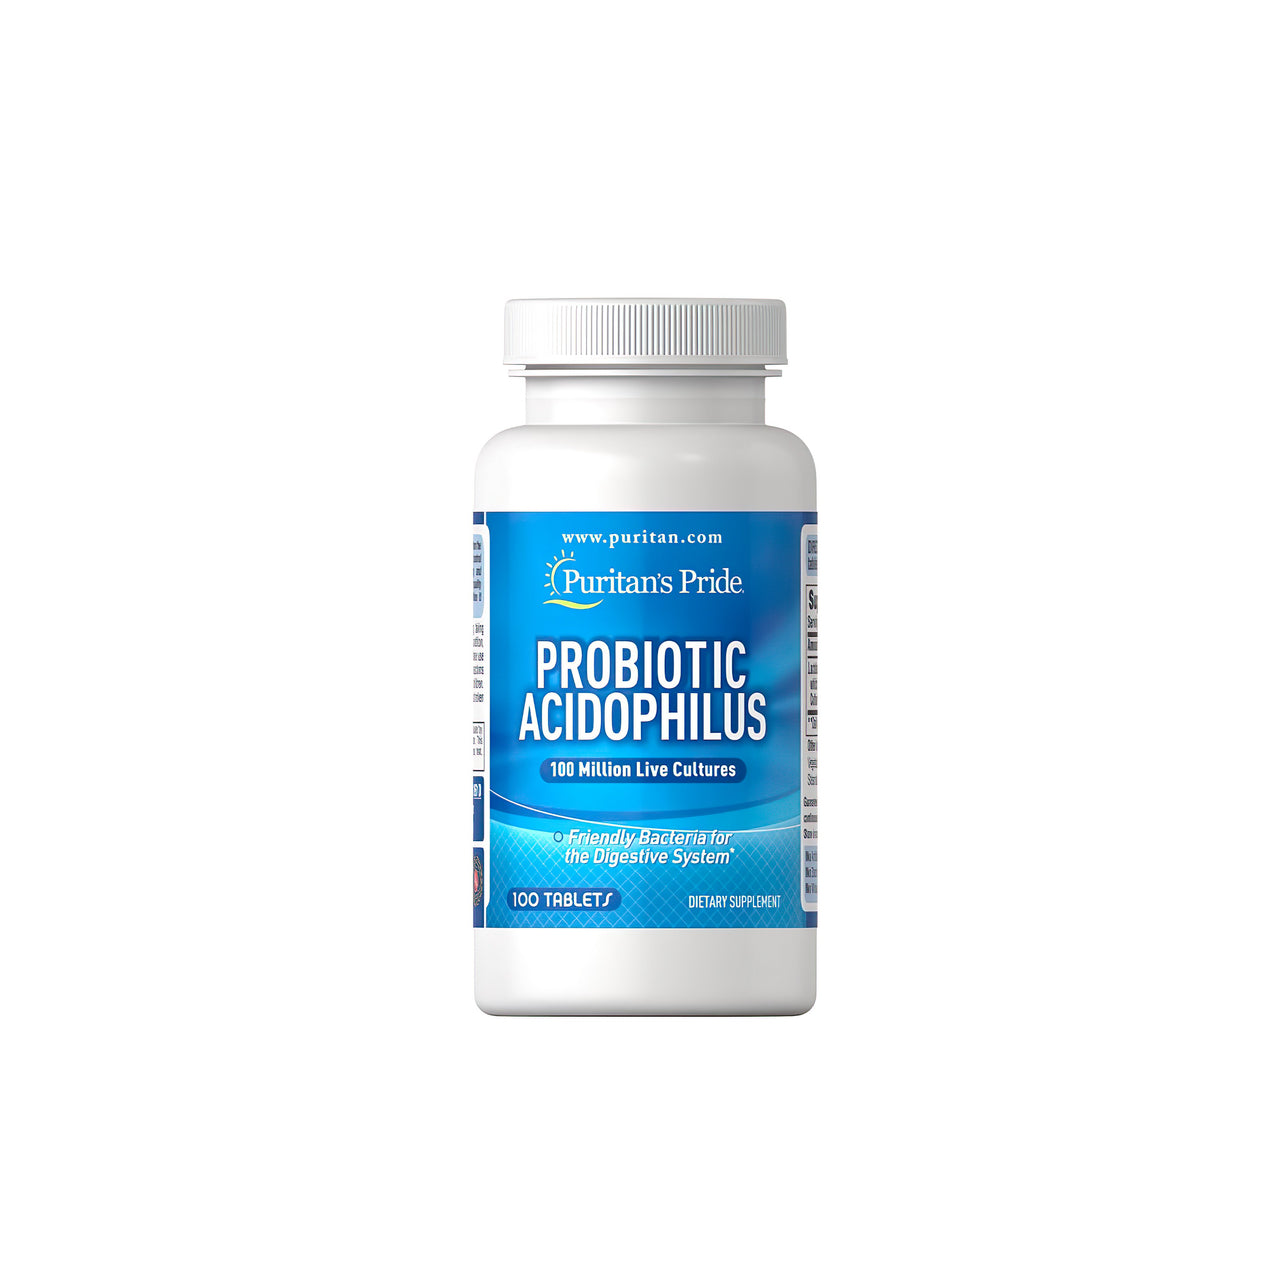 A bottle of Probiotic Acidophilus 100 tablets by Puritan's Pride, containing digestive and immune system probiotics.